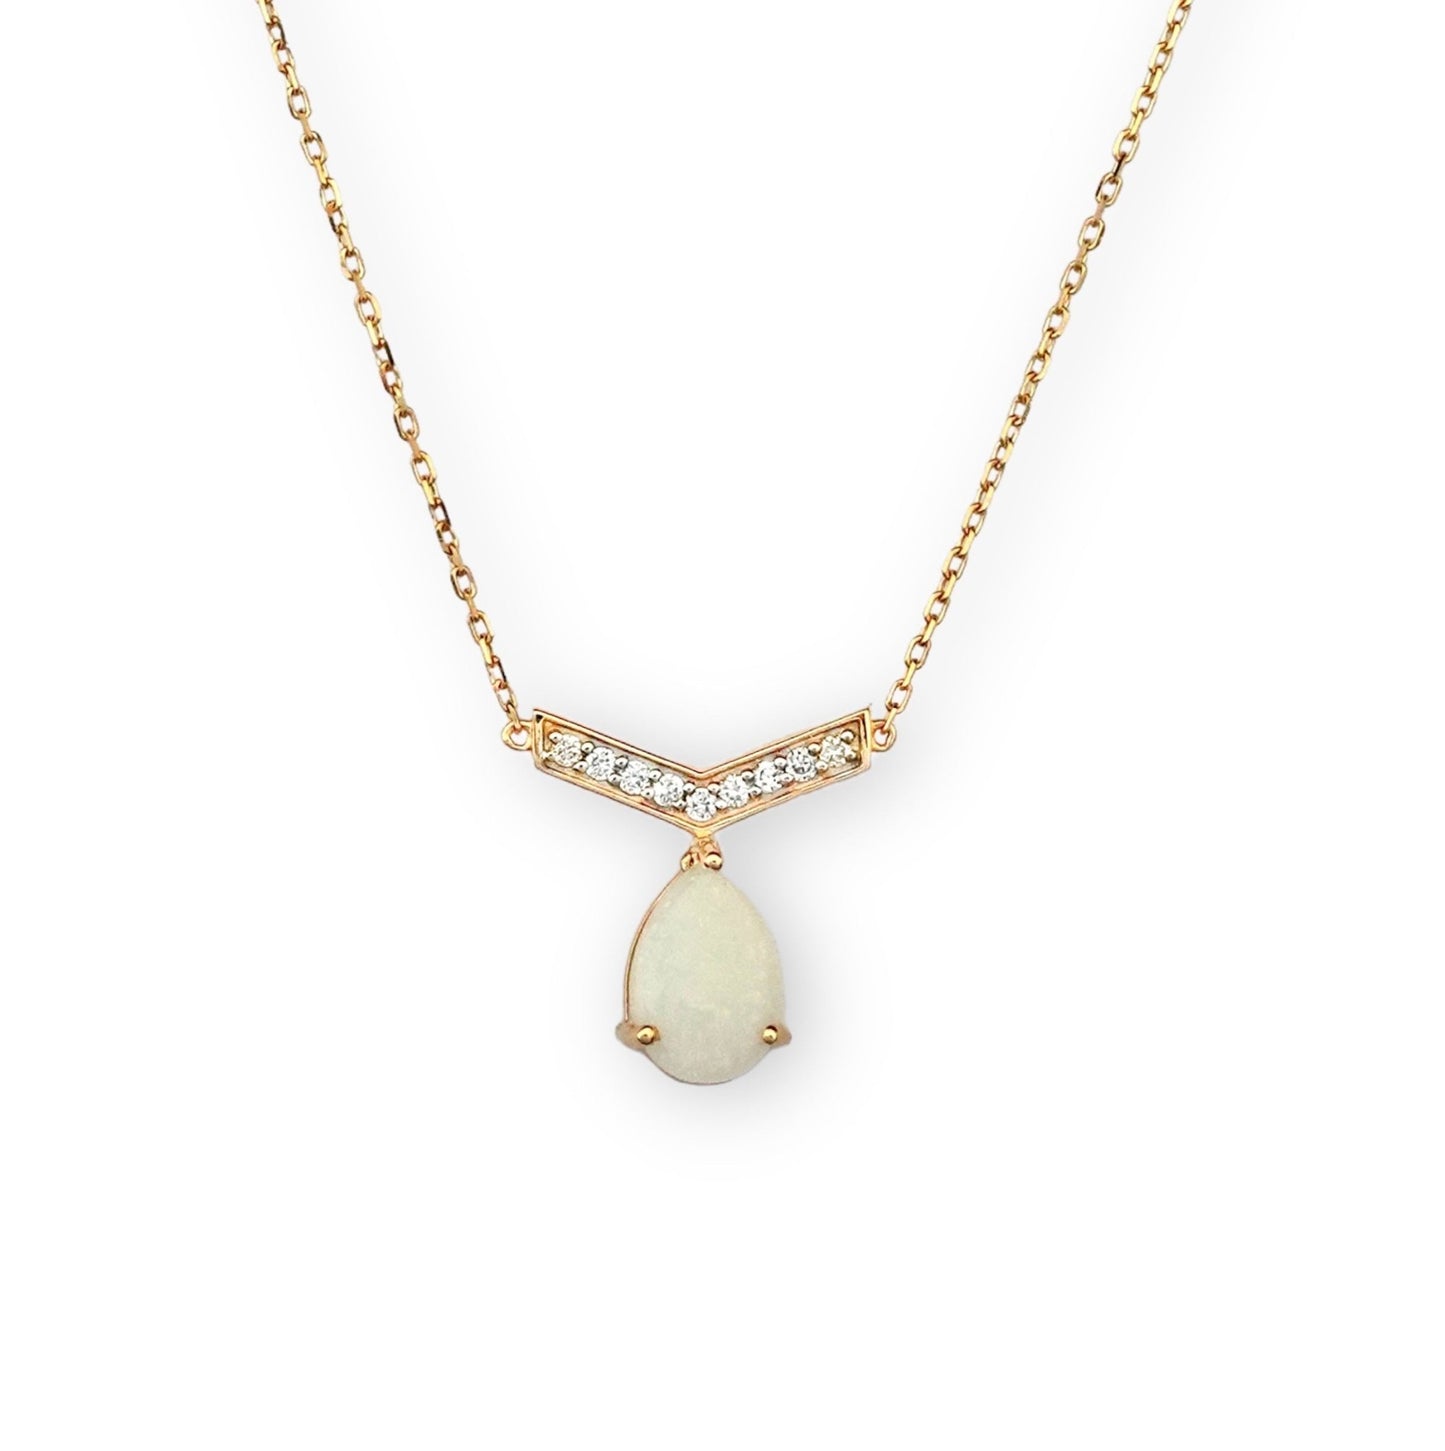 Victoria Necklace in Diamond and Opal - 18k Gold - Lynor